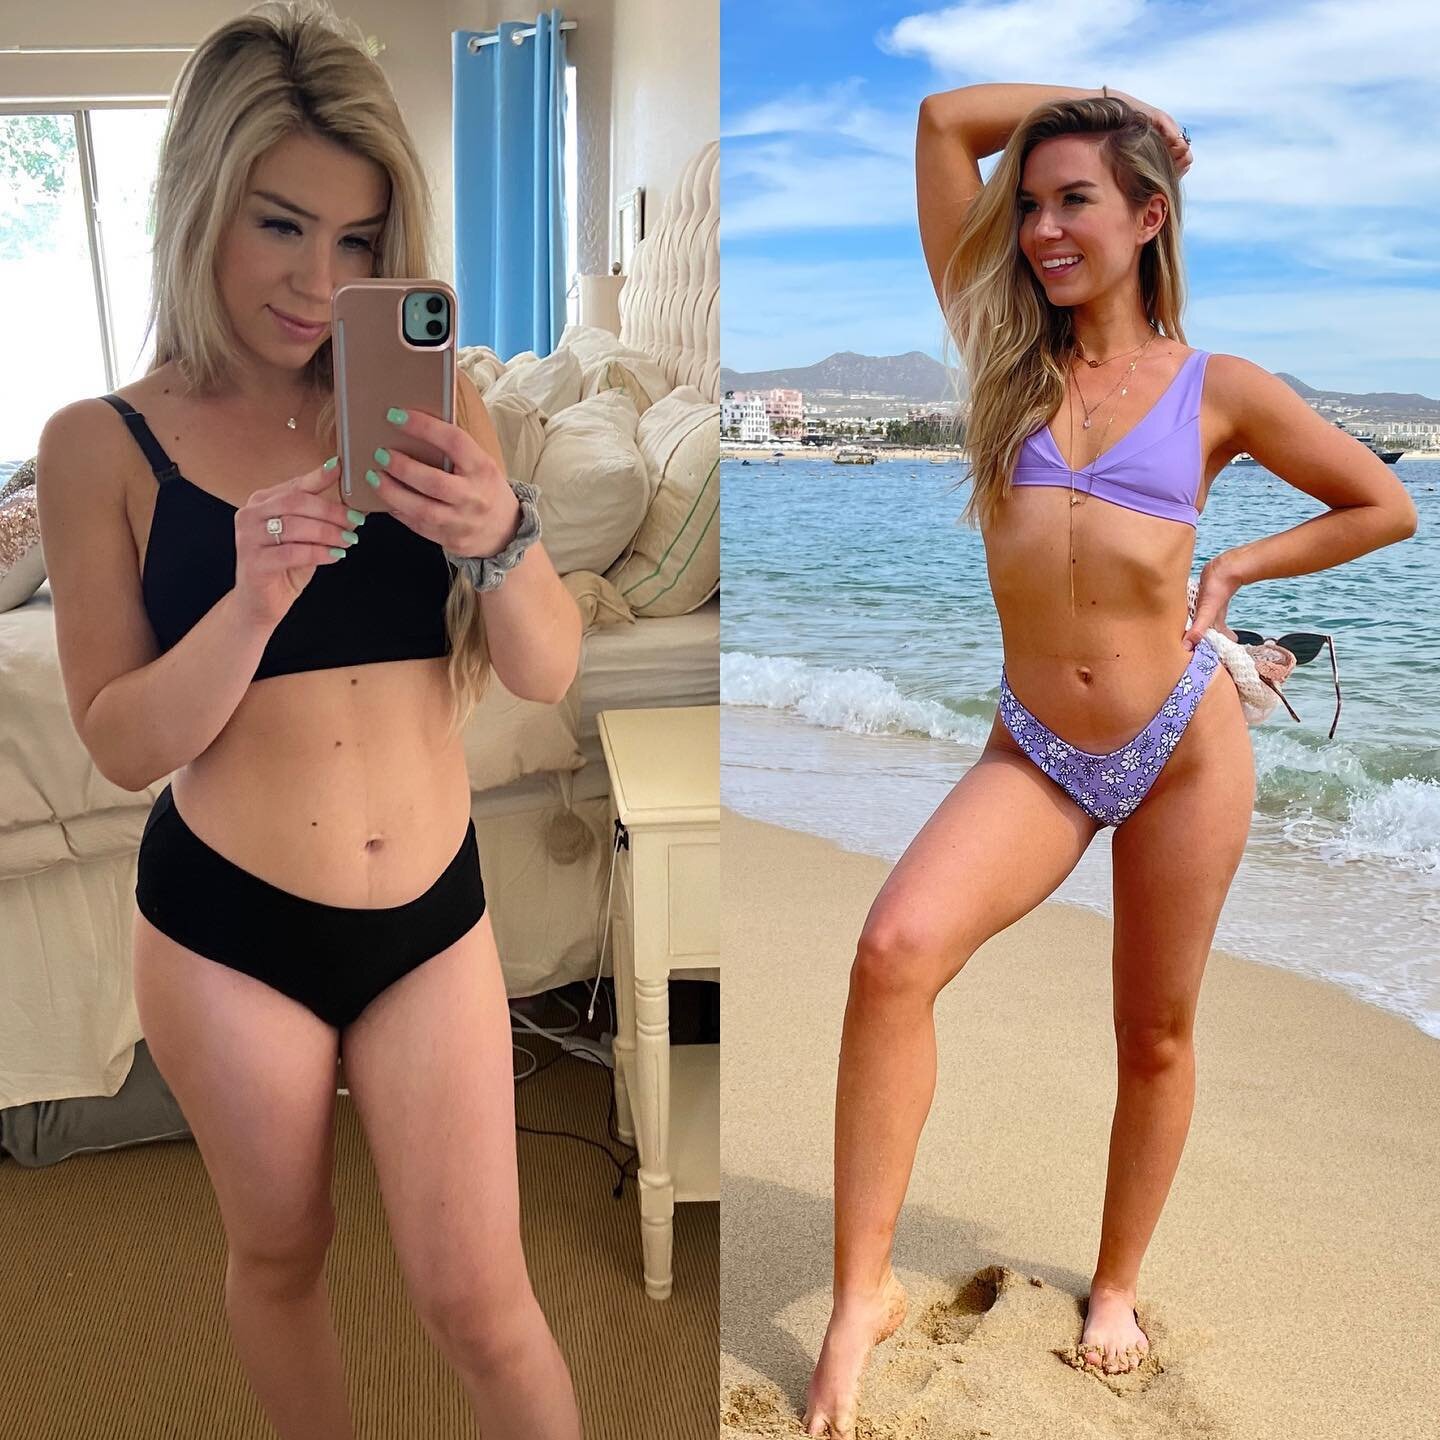 Introducing my 𝟗𝟎 𝐝𝐚𝐲 𝐬𝐡𝐫𝐞𝐝 𝐩𝐫𝐨𝐠𝐫𝐚𝐦 **insert happy dance**💃🏼⁣
⁣
The Slay Squad&rsquo;s 90 Day Shred is a program built for busy women who want to drop 𝟏𝟎-𝟏𝟓 𝐩𝐨𝐮𝐧𝐝𝐬 in a healthy and sustainable way. 🥳I couldn&rsquo;t be m